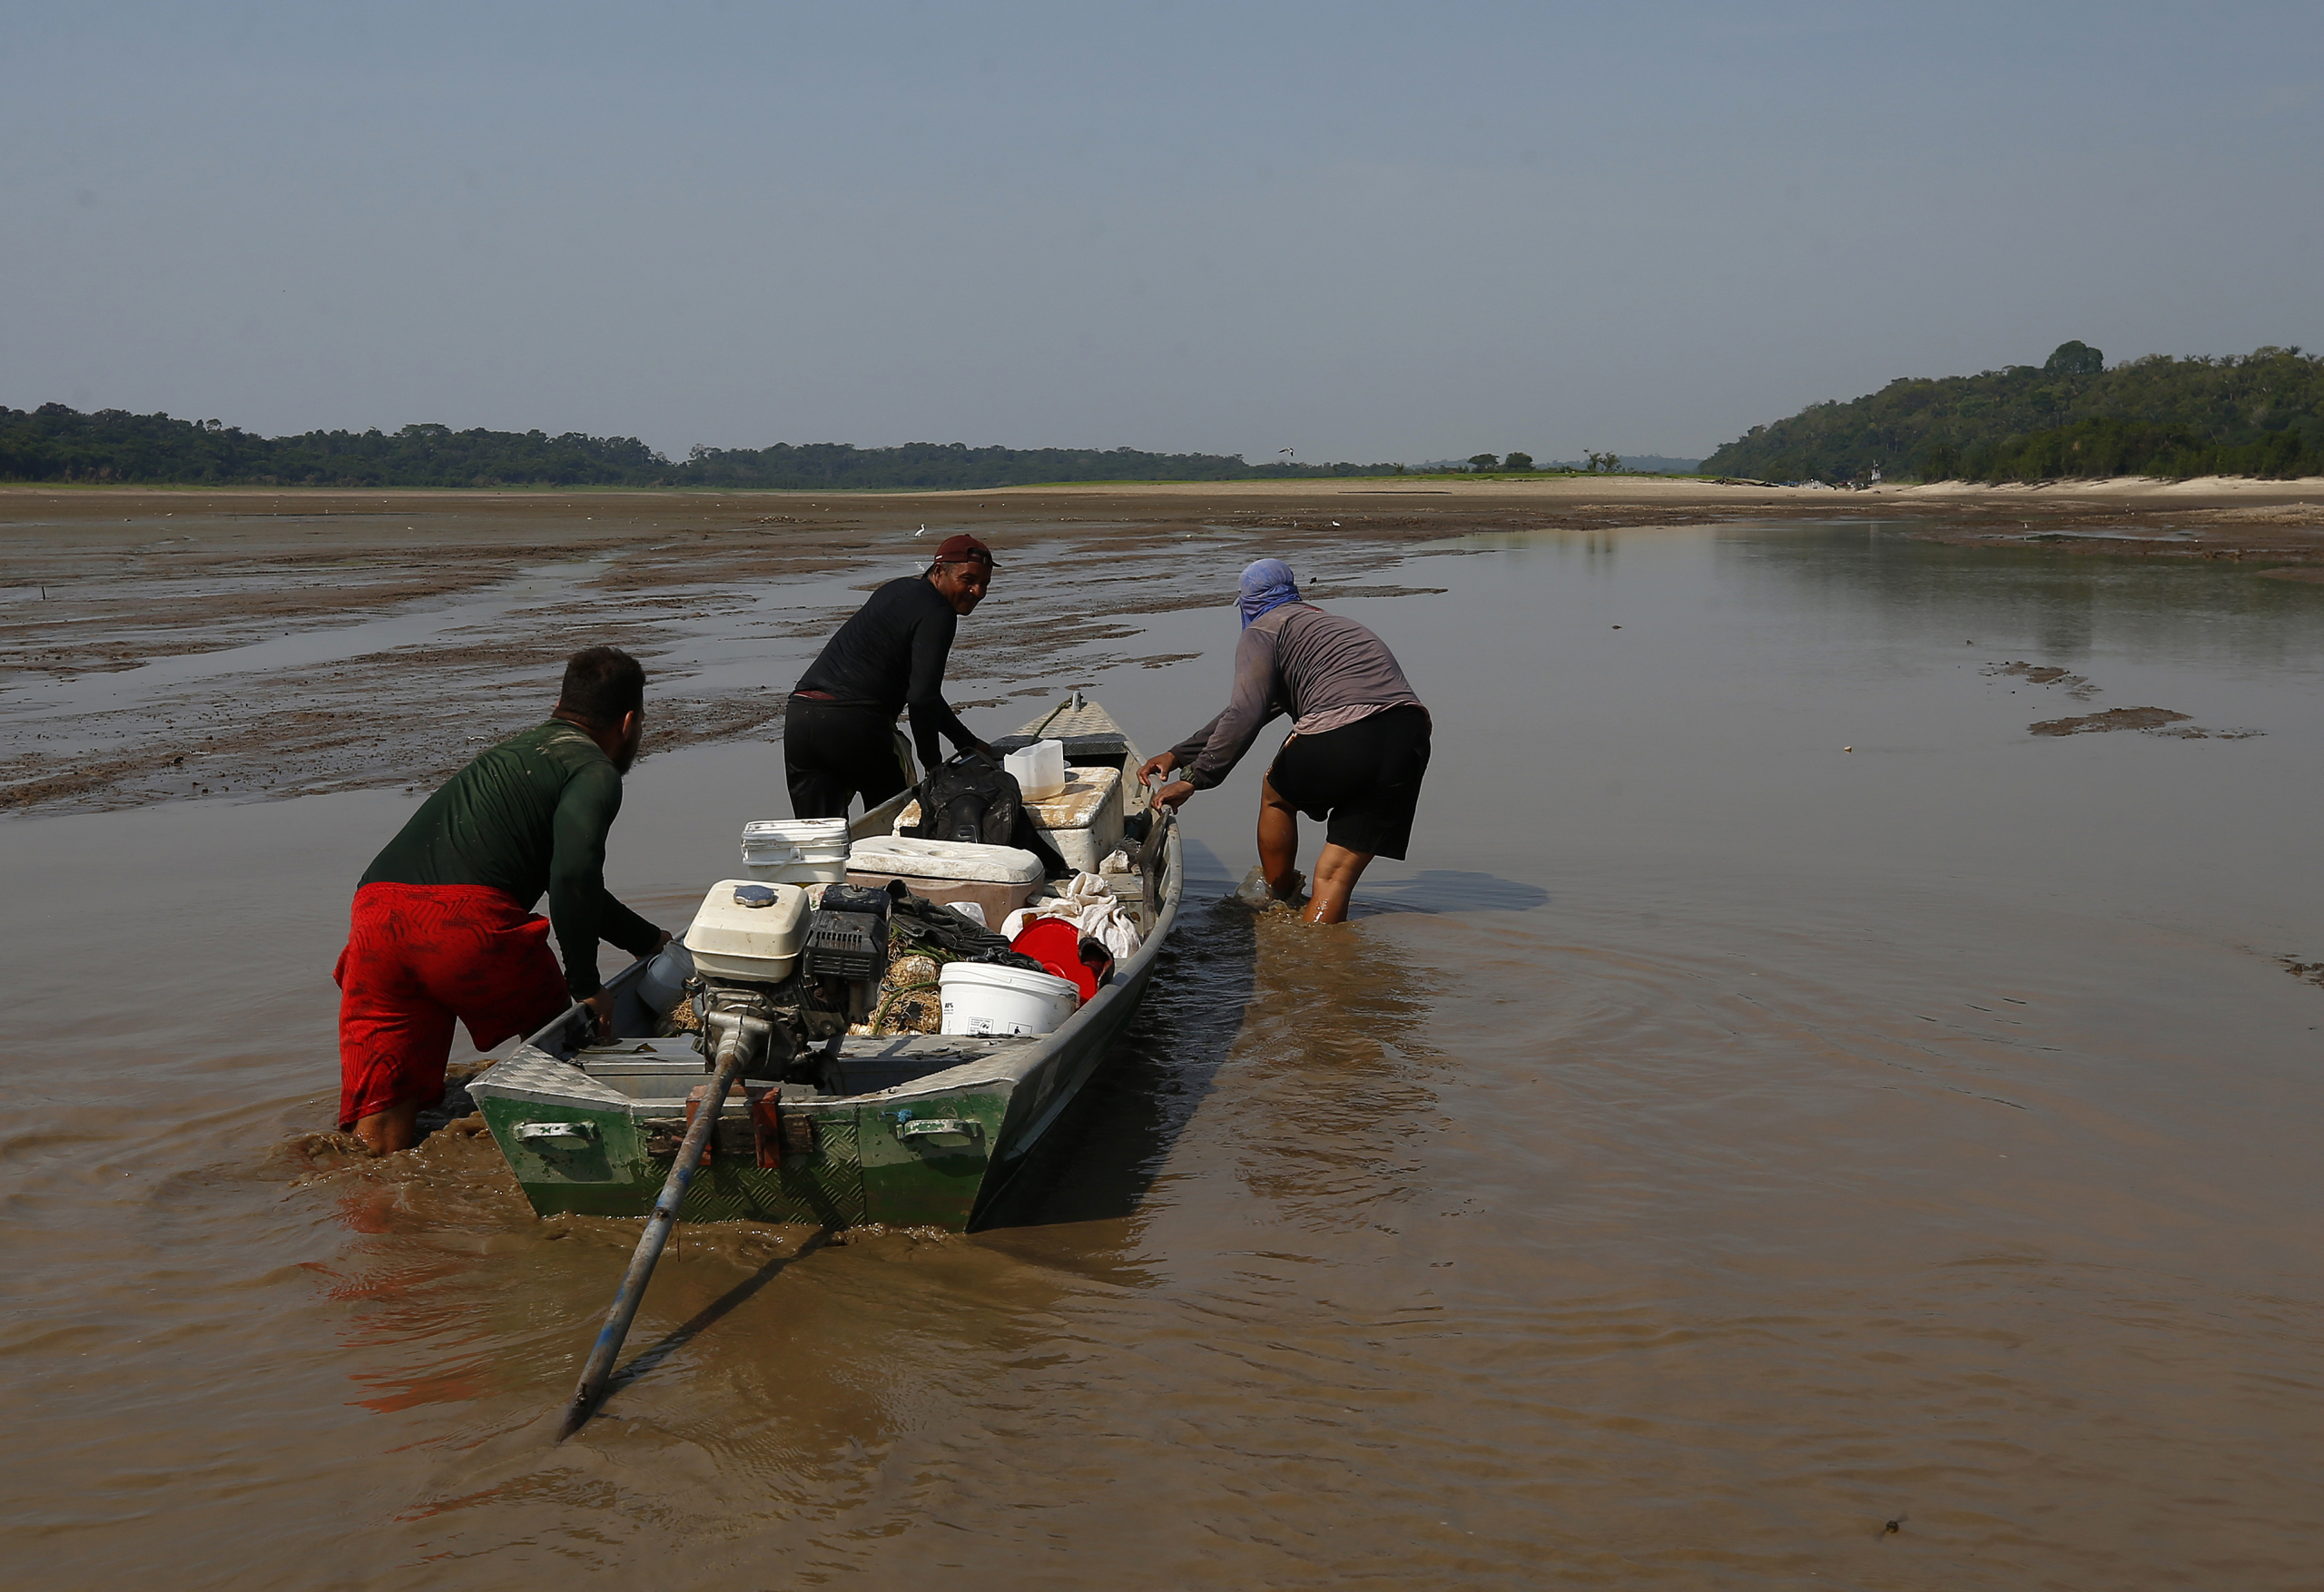 Fishermen pull a boat on the remaining water of Puraquequara lake affected by a severe drought, in Manaus, Amazonas state, Brazil, Thursday, Oct. 5, 2023. The Brazilian Amazon rainforest is facing a severe drought that may affect around 500,000 people by the end of the year. (AP Photo/Edmar Barros)Associated Press/LaPresseOnly Italy and Spain